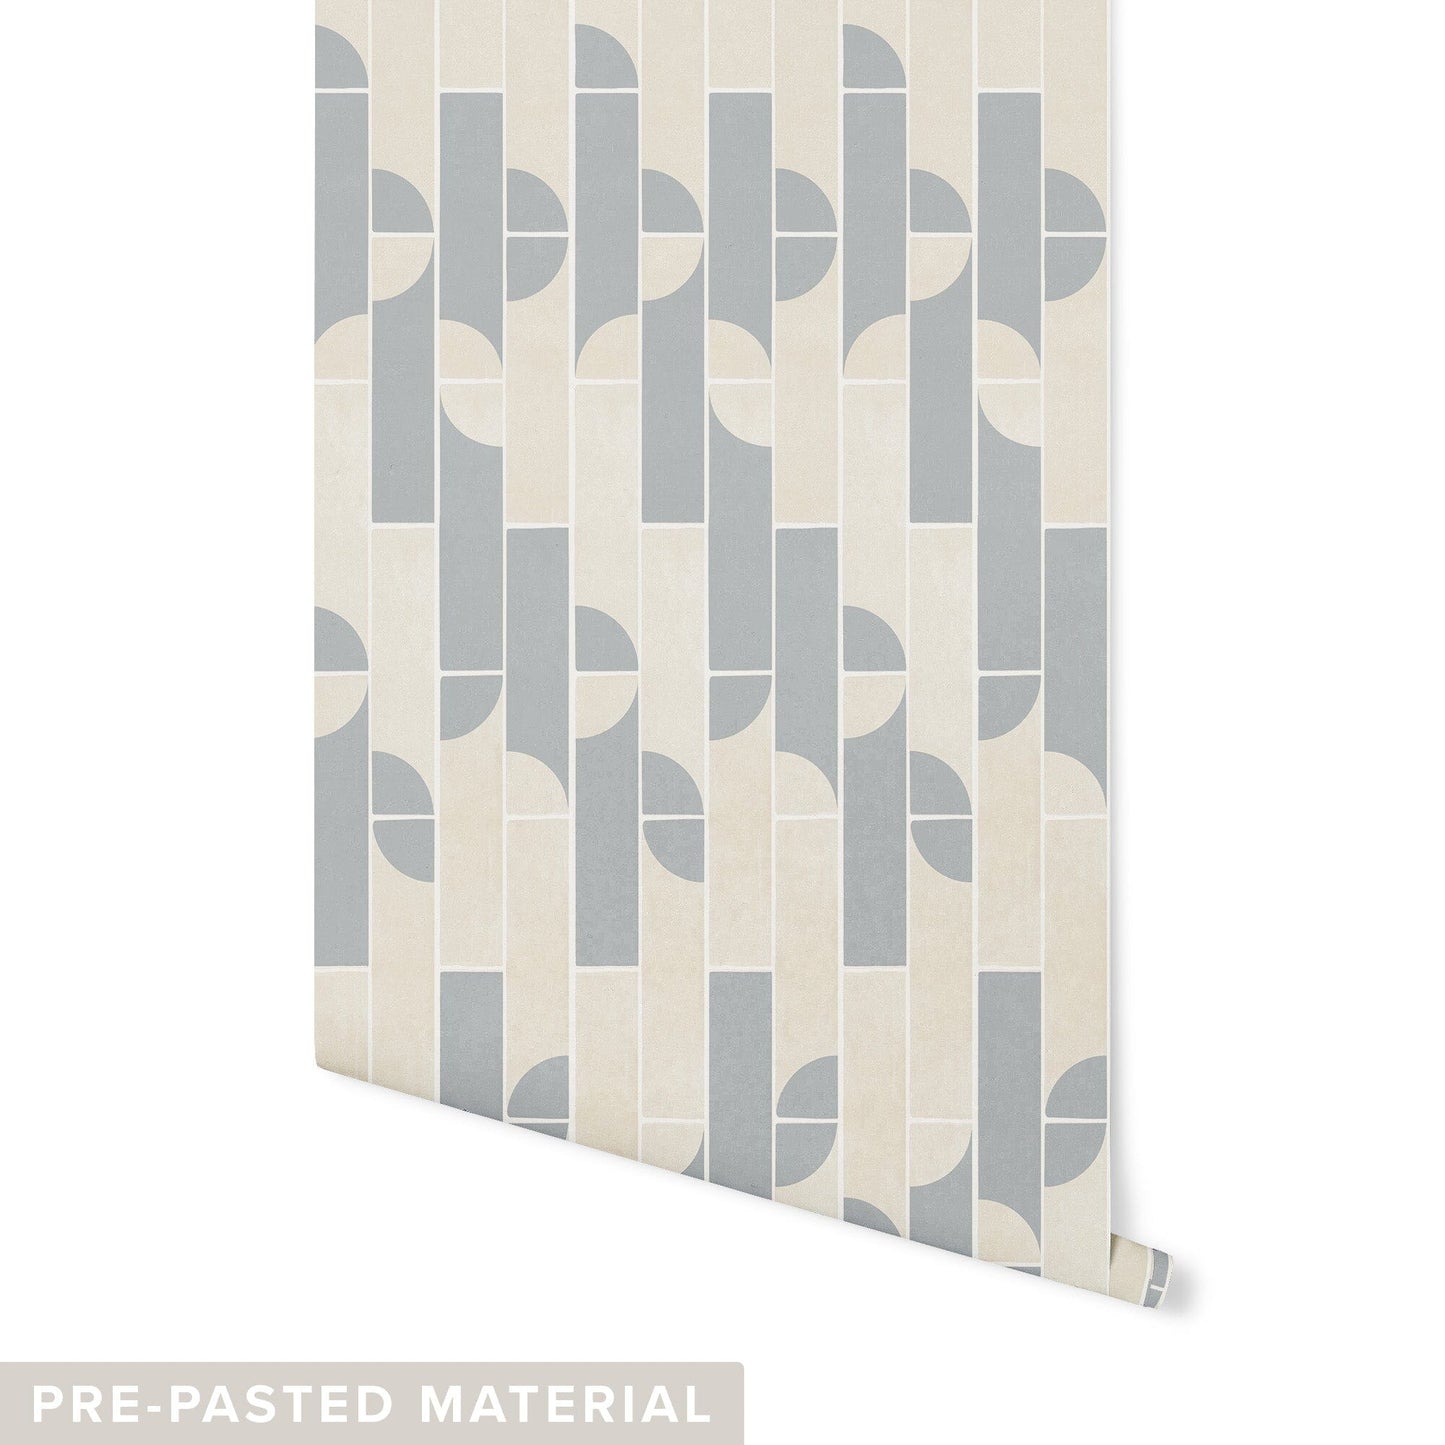 Curved Tile Wallpaper Wallpaper Urbanwalls Pre-pasted DOUBLE ROLL : 46" X 4 FEET Blue